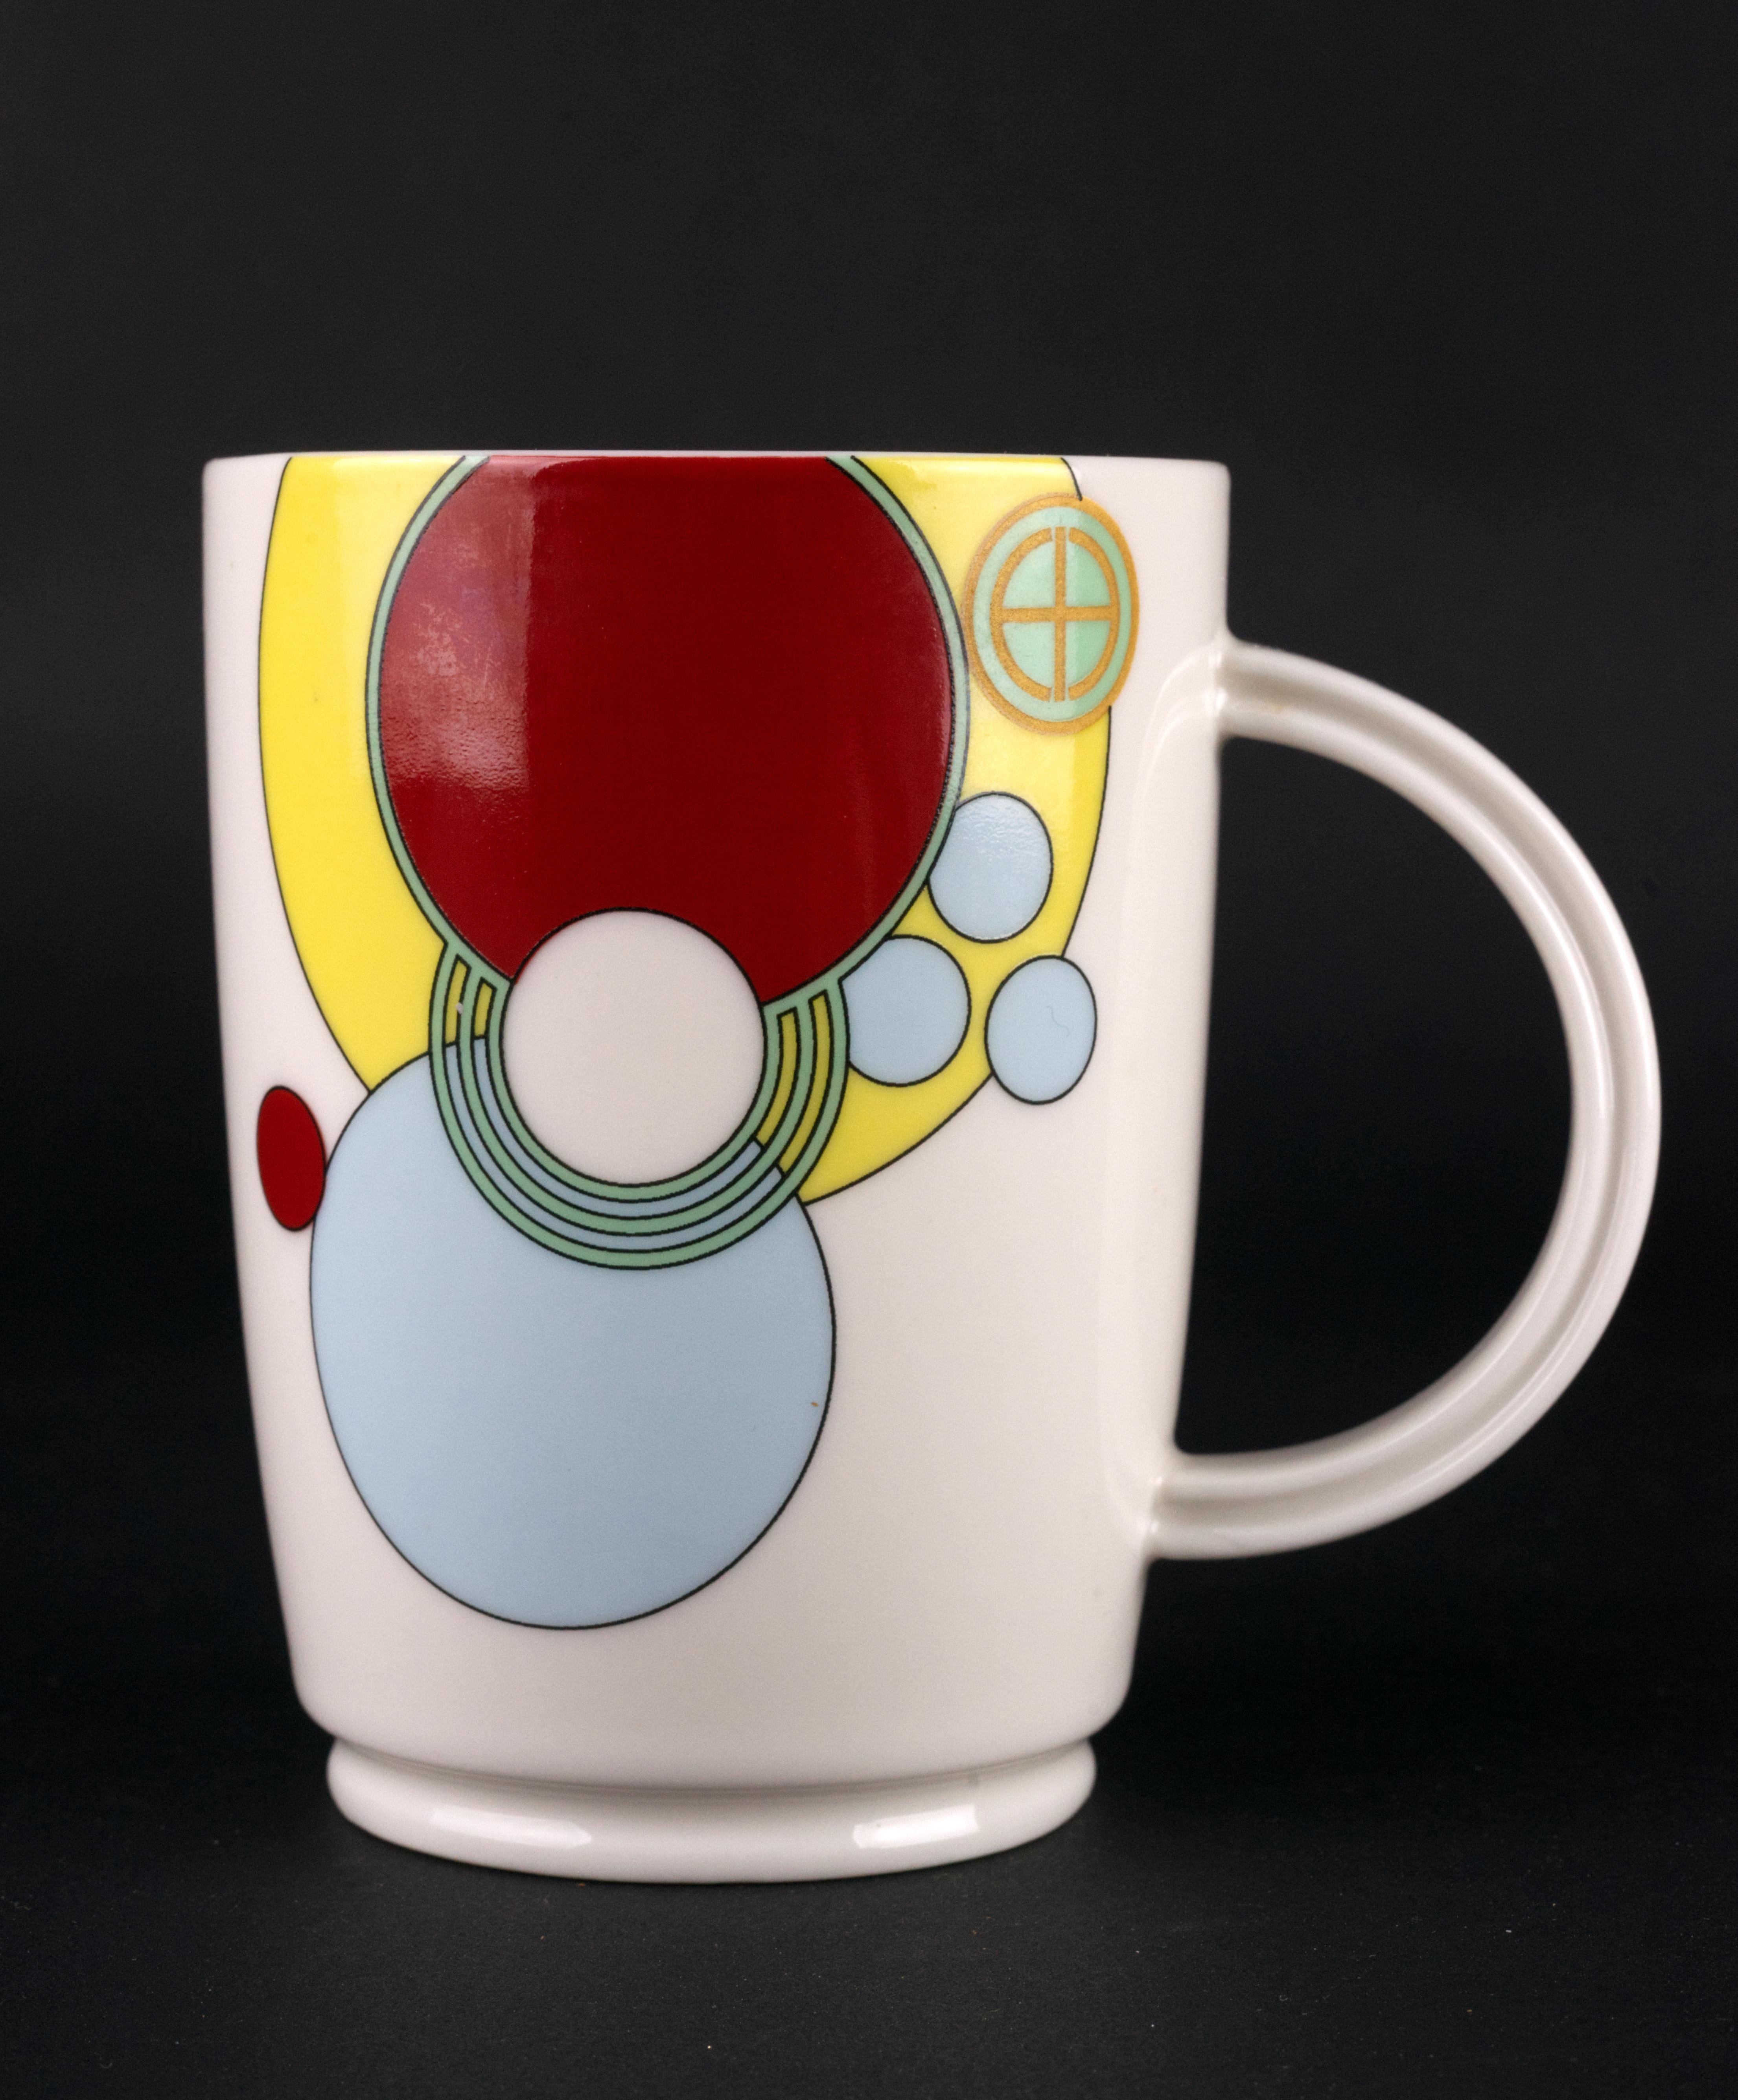 
Frank Lloyd Wright Collection footed mug is decorated with artist's renown Imperial Hotel 